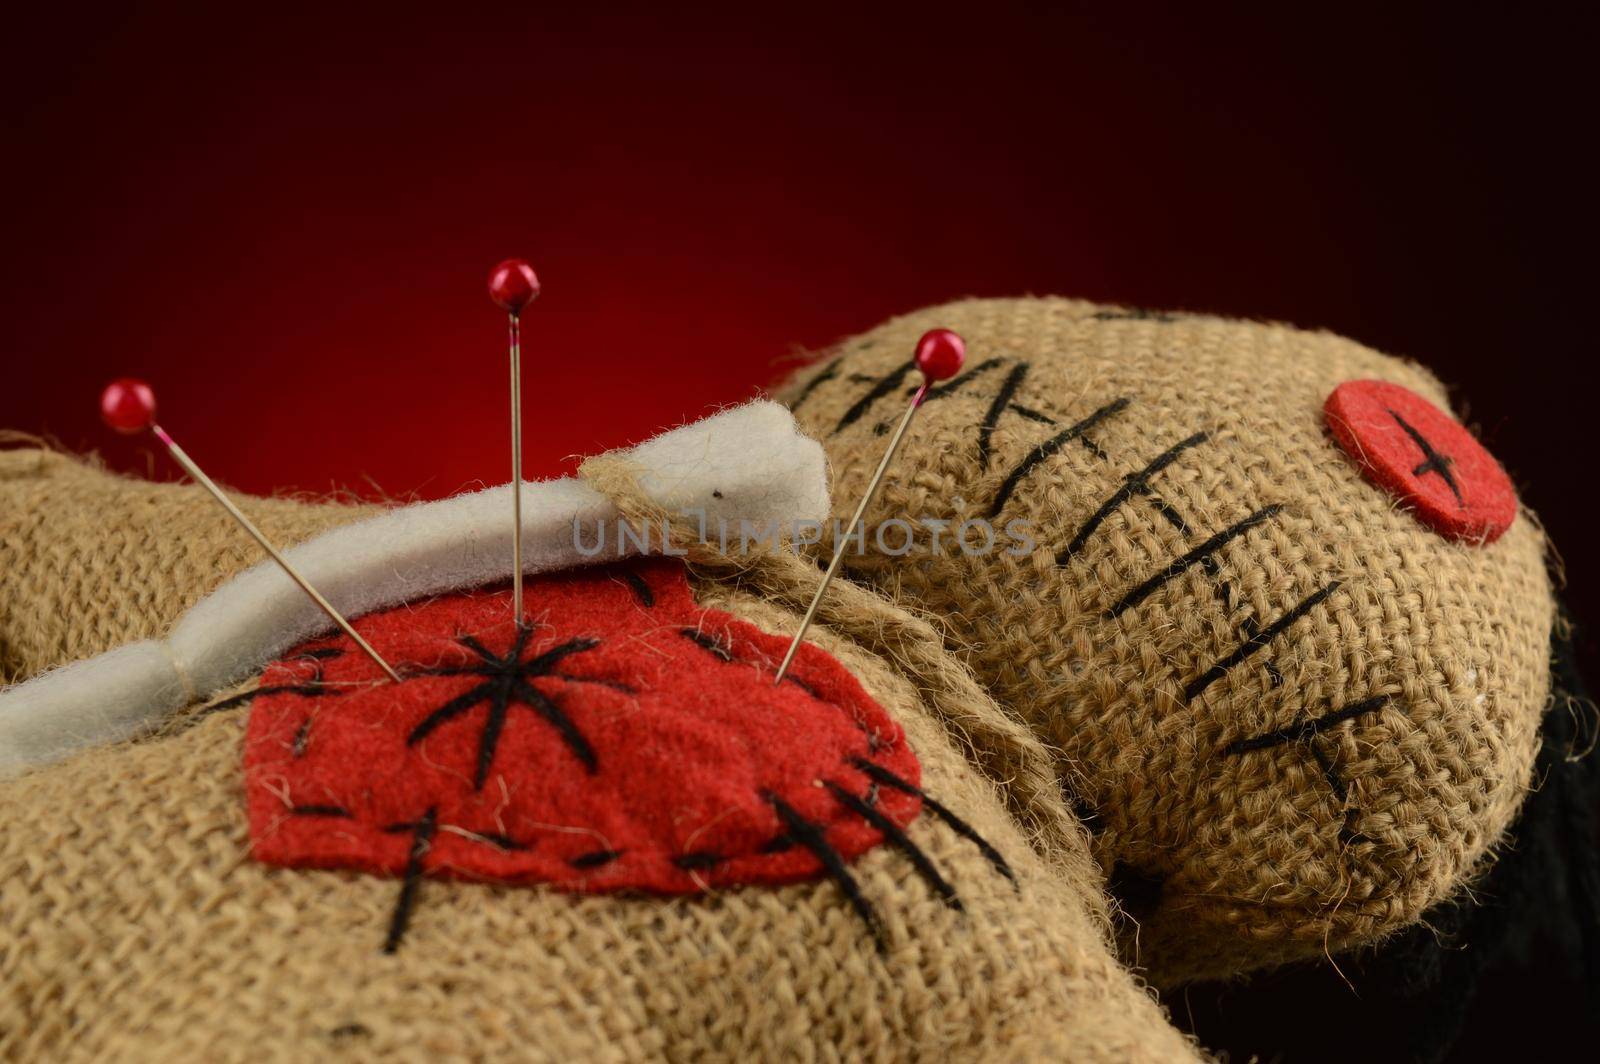 A few pins are stuck inside the heart of a voodoo doll over a dark red and black background.